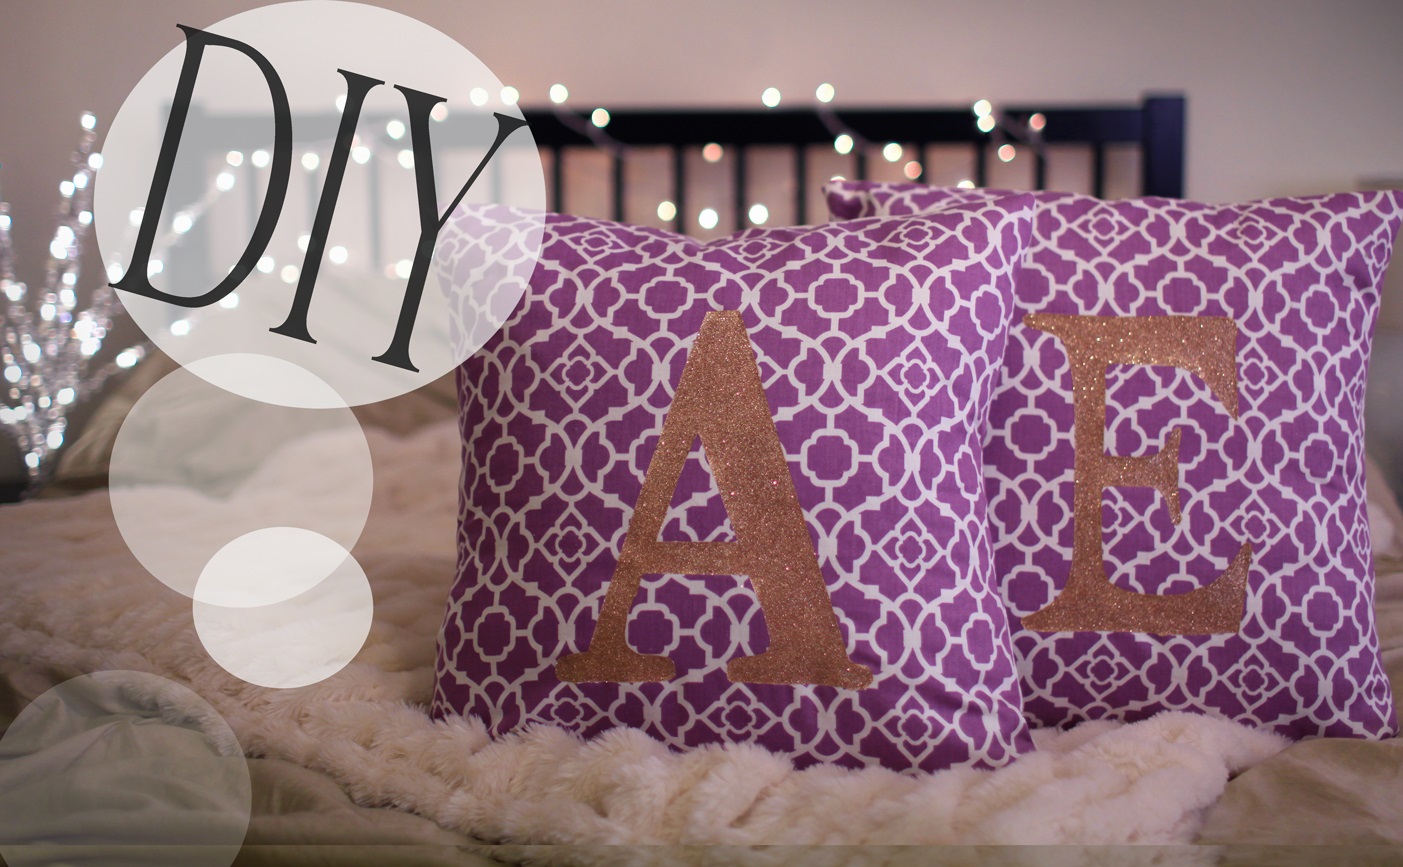 Sparkly monogrammed pillow cases No Sew Pillow Case Patterns